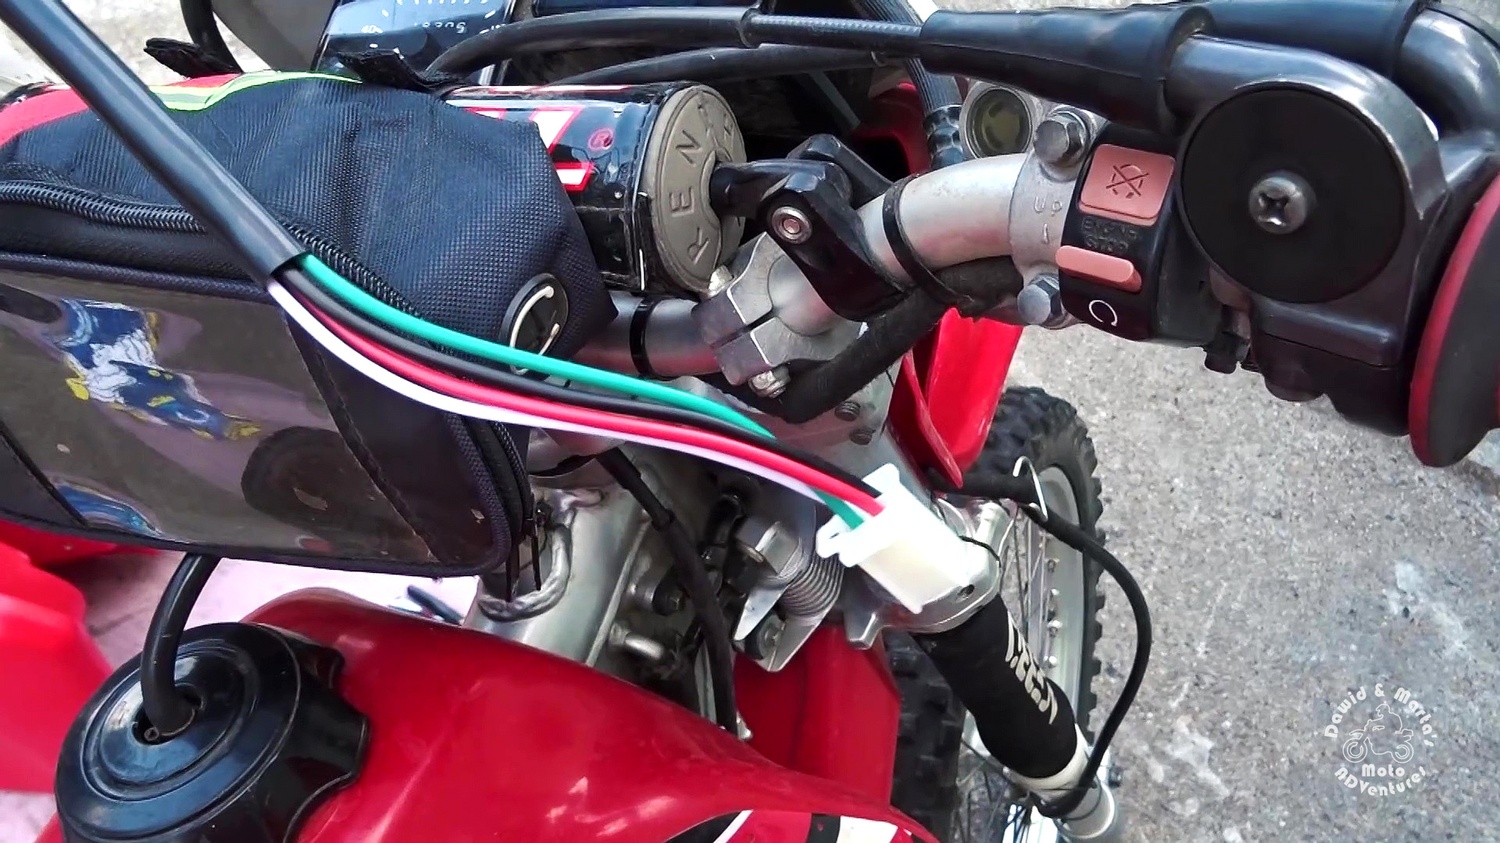 XR400 ignition switch wiring